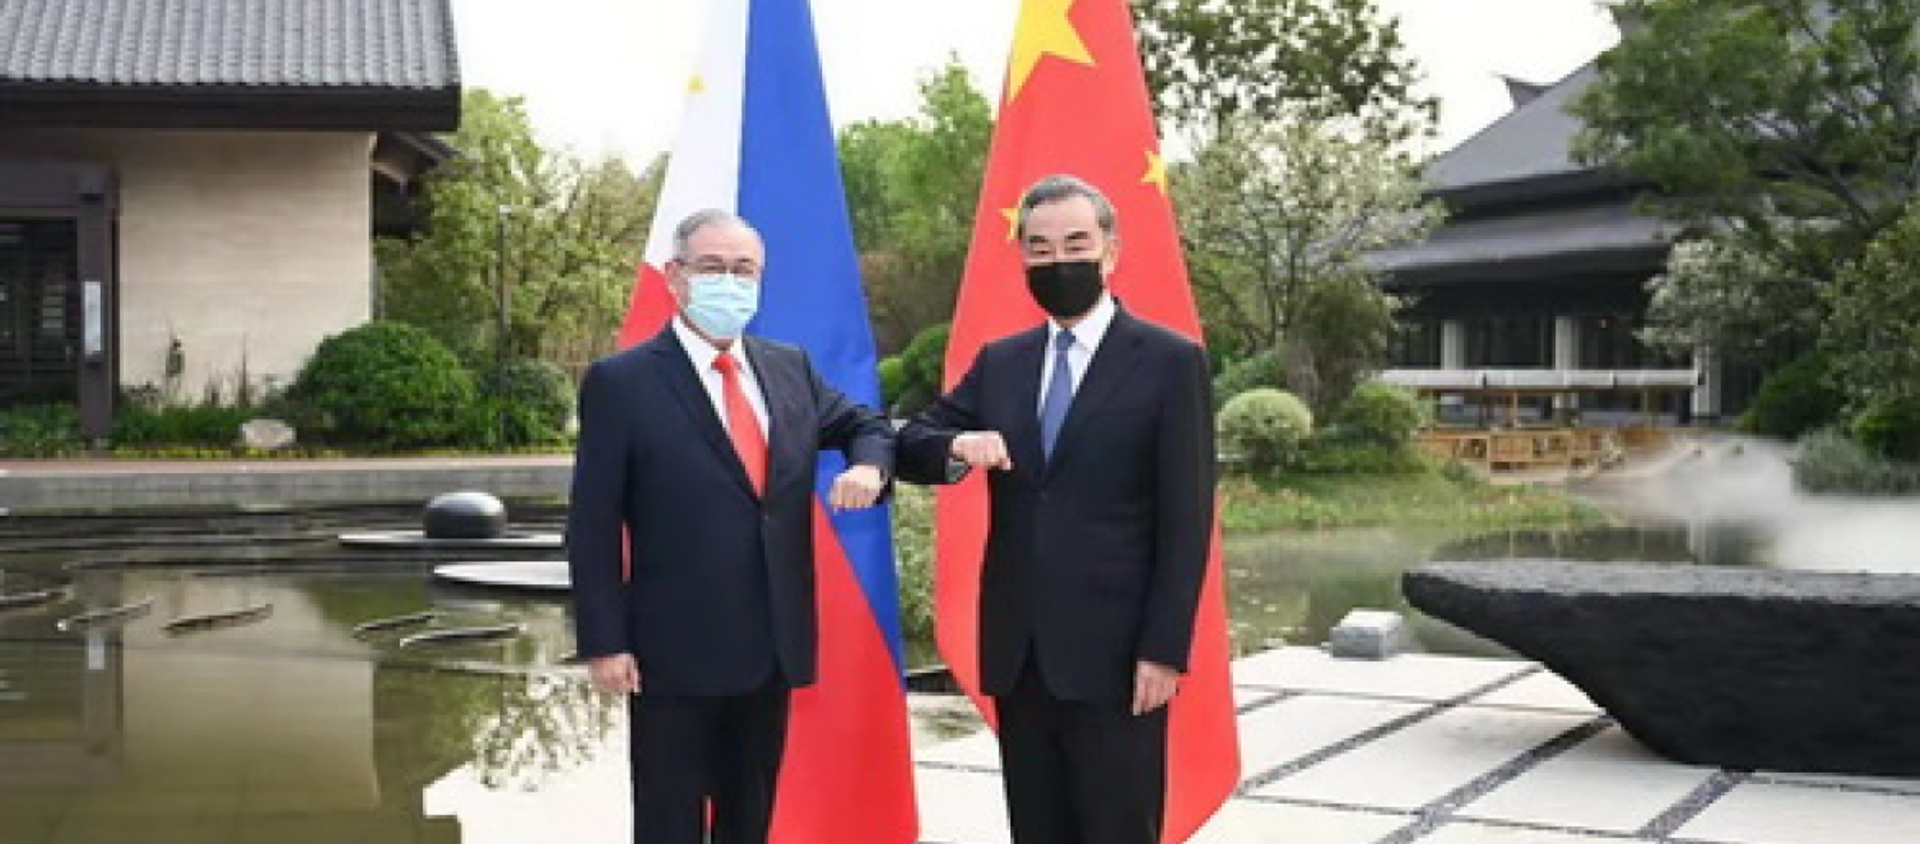 Chinese State Councilor and Foreign Minister Wang Yi held talks with Philippine Foreign Secretary Teodoro Locsin in Nanping City, Fujian Province on April 2, 2021. - Sputnik International, 1920, 09.04.2021